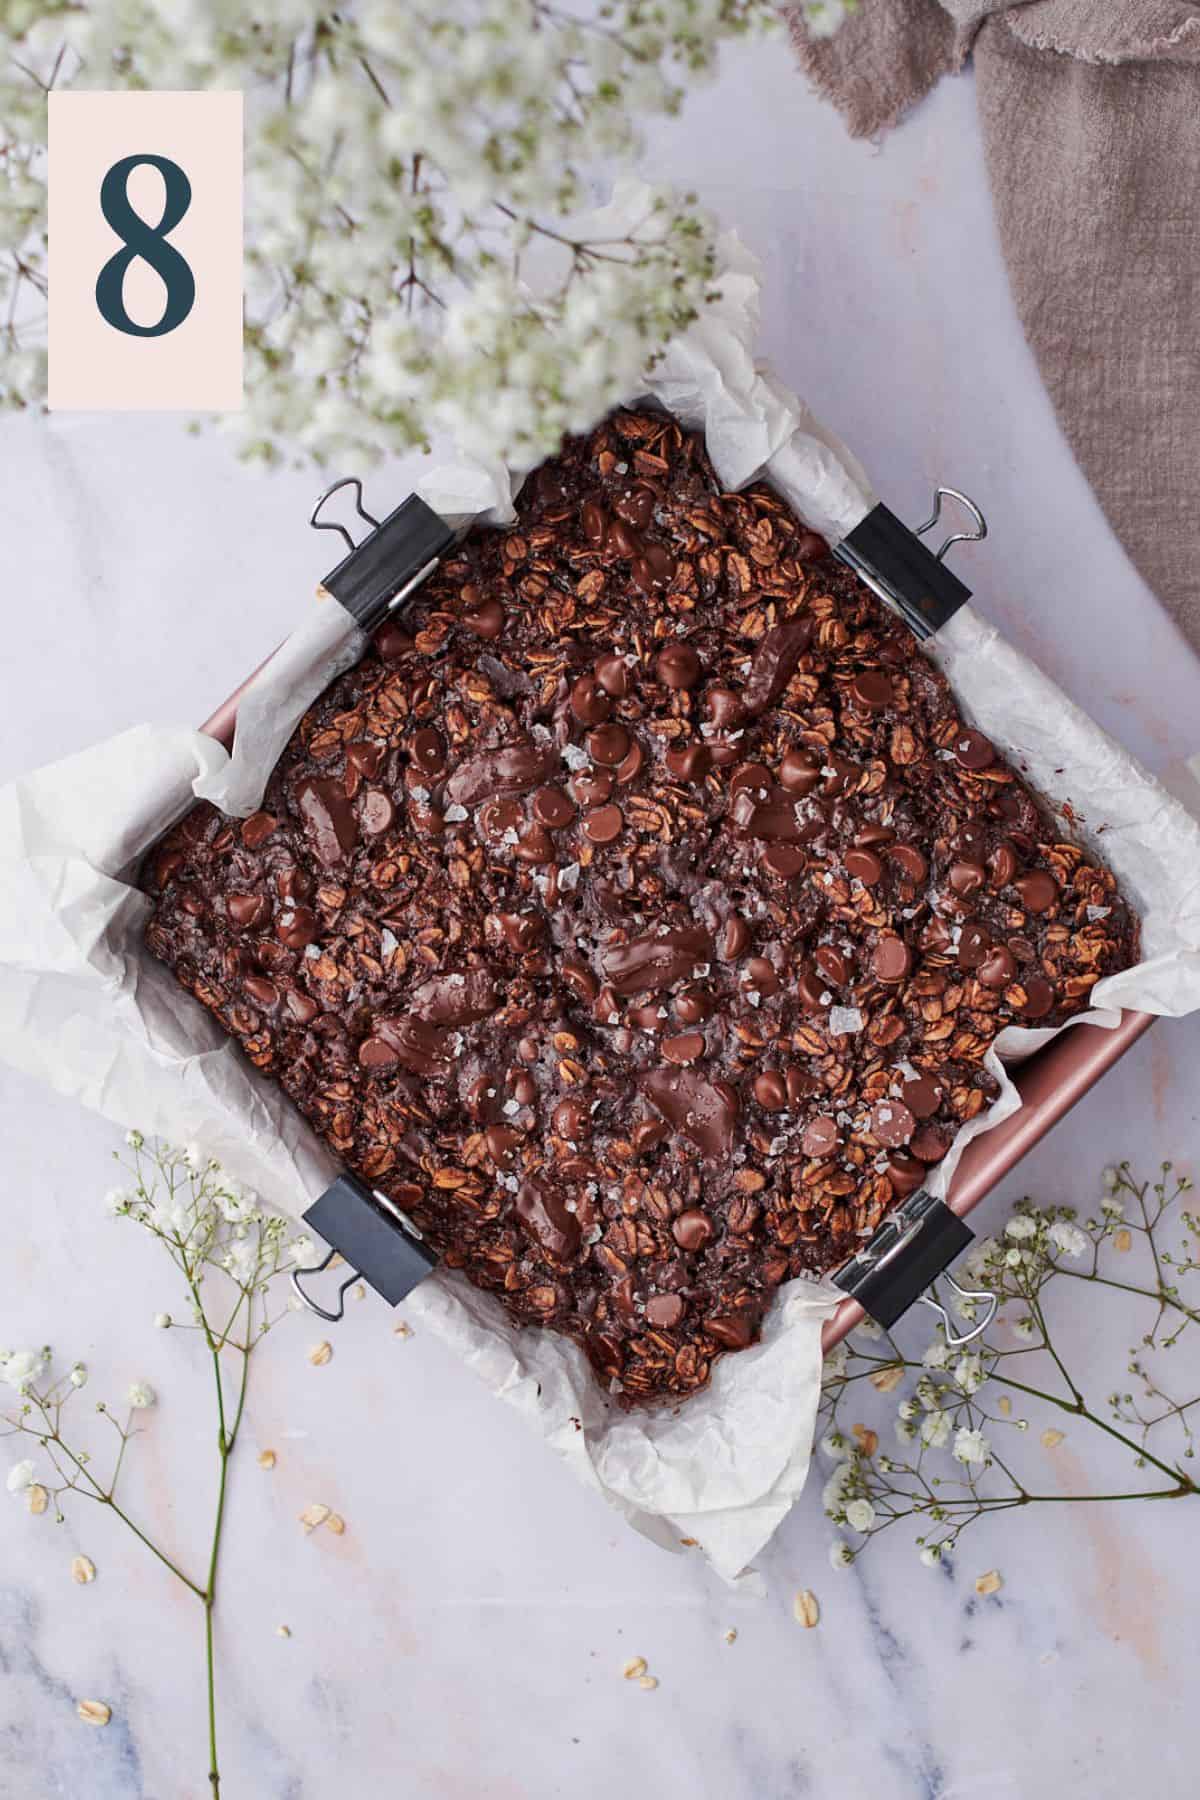 baked chocolate oats in a baking dish.